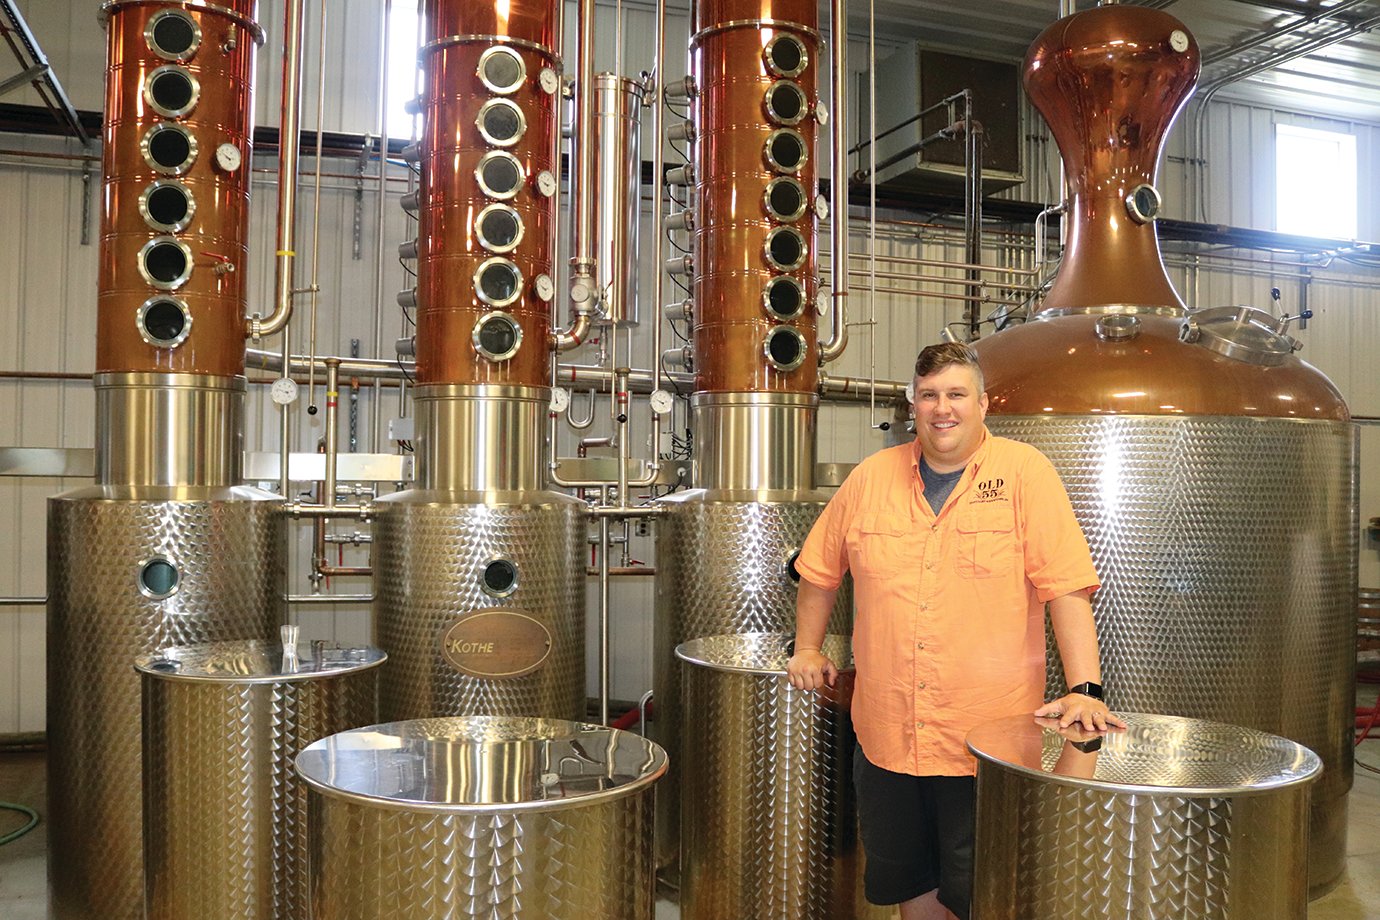 Old 55 Distillery CEO Jason Fruits displays the still at the Newtown distillery Friday afternoon. Made with imported equipment from Germany's Kothe Distilling Technologies company, the still has produced several bourbon whiskies which have received awards through the International Whisky Competition.